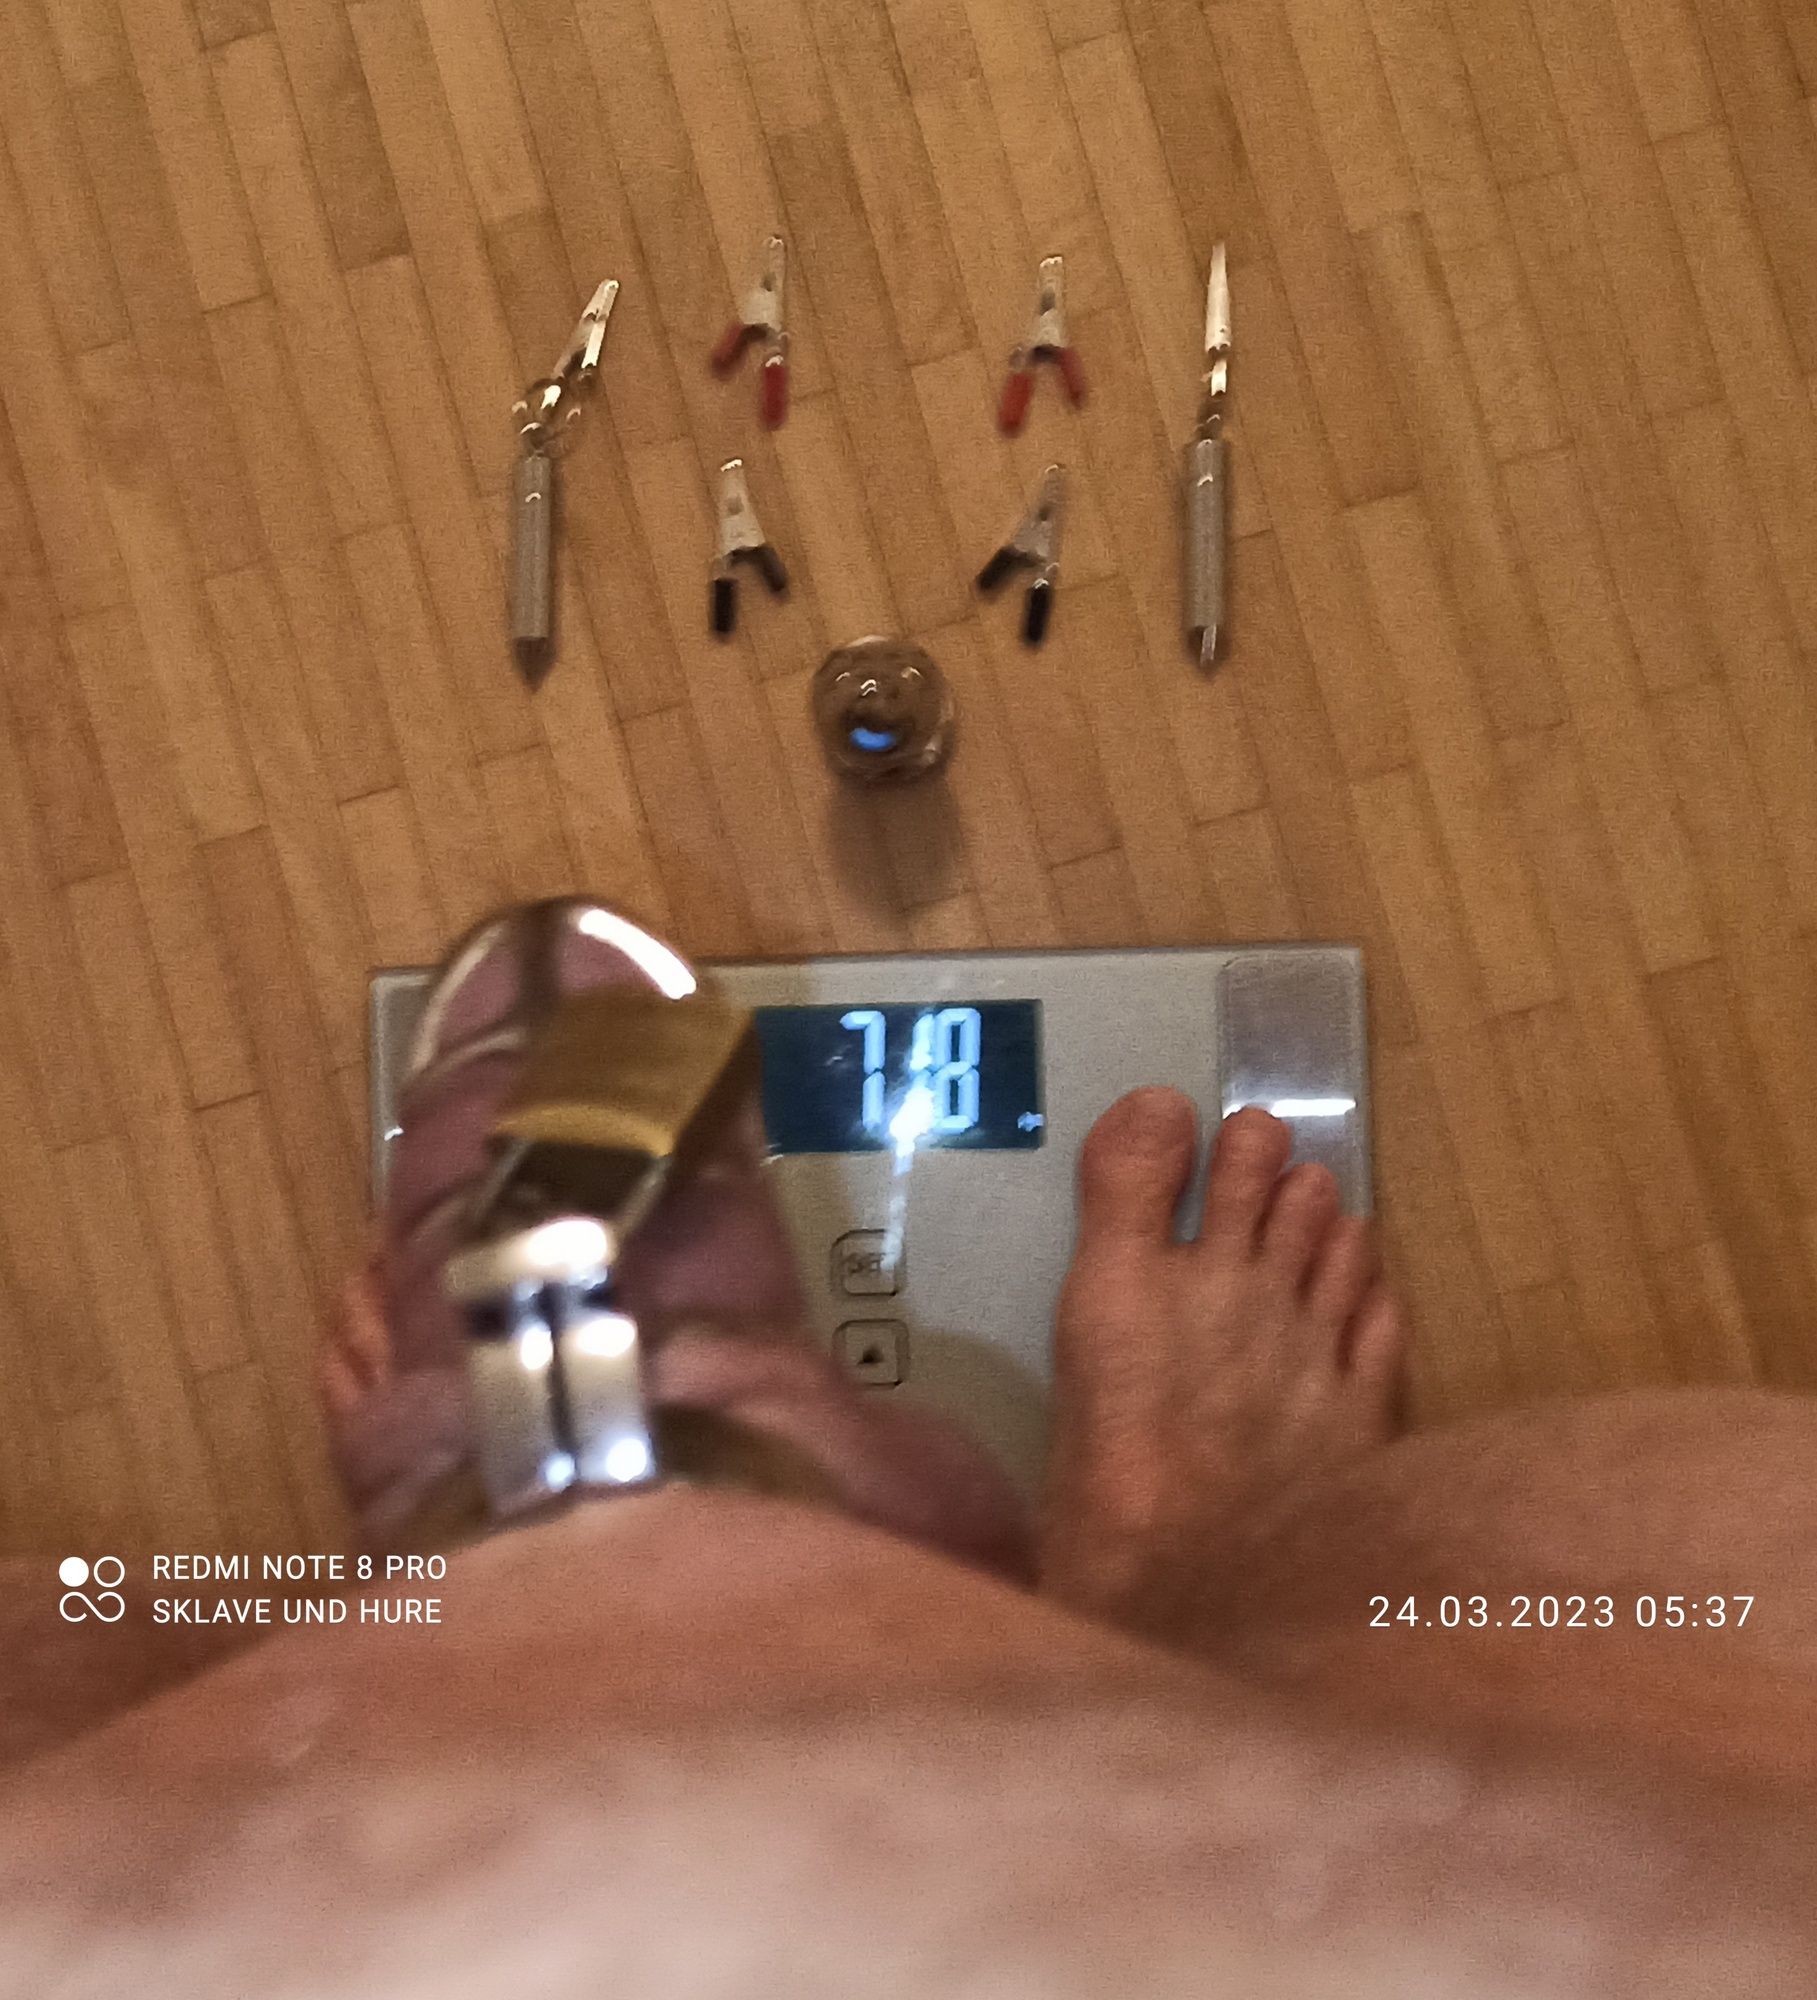 Reward, weighing and cagecheck of 24.03.2023